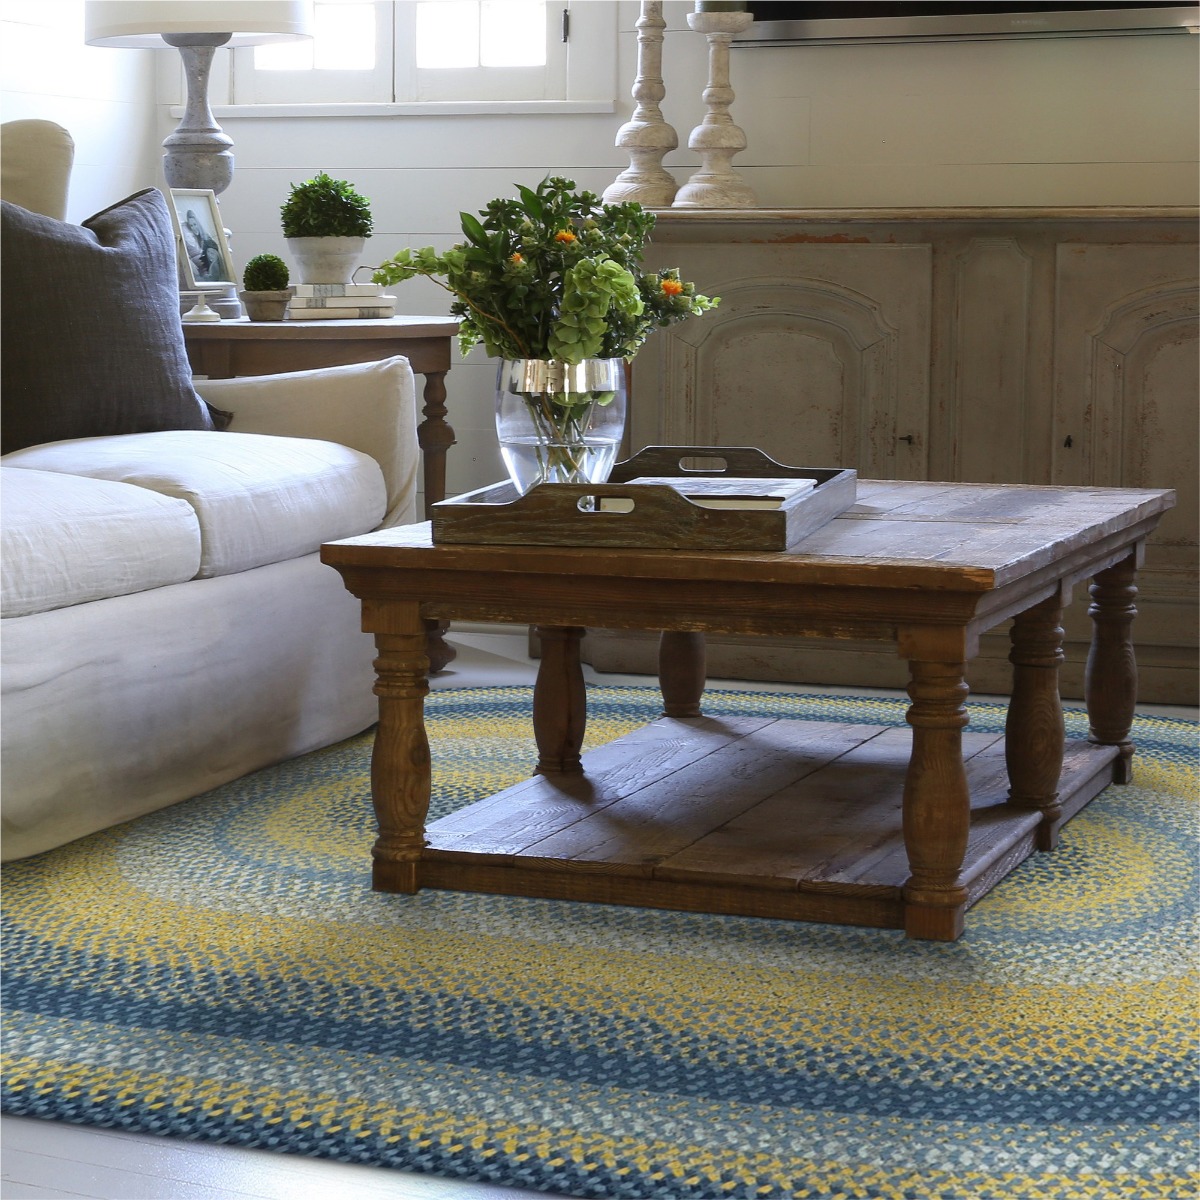 Room Sunflowers Blue - Gold Cotton Braided Oval Rugs